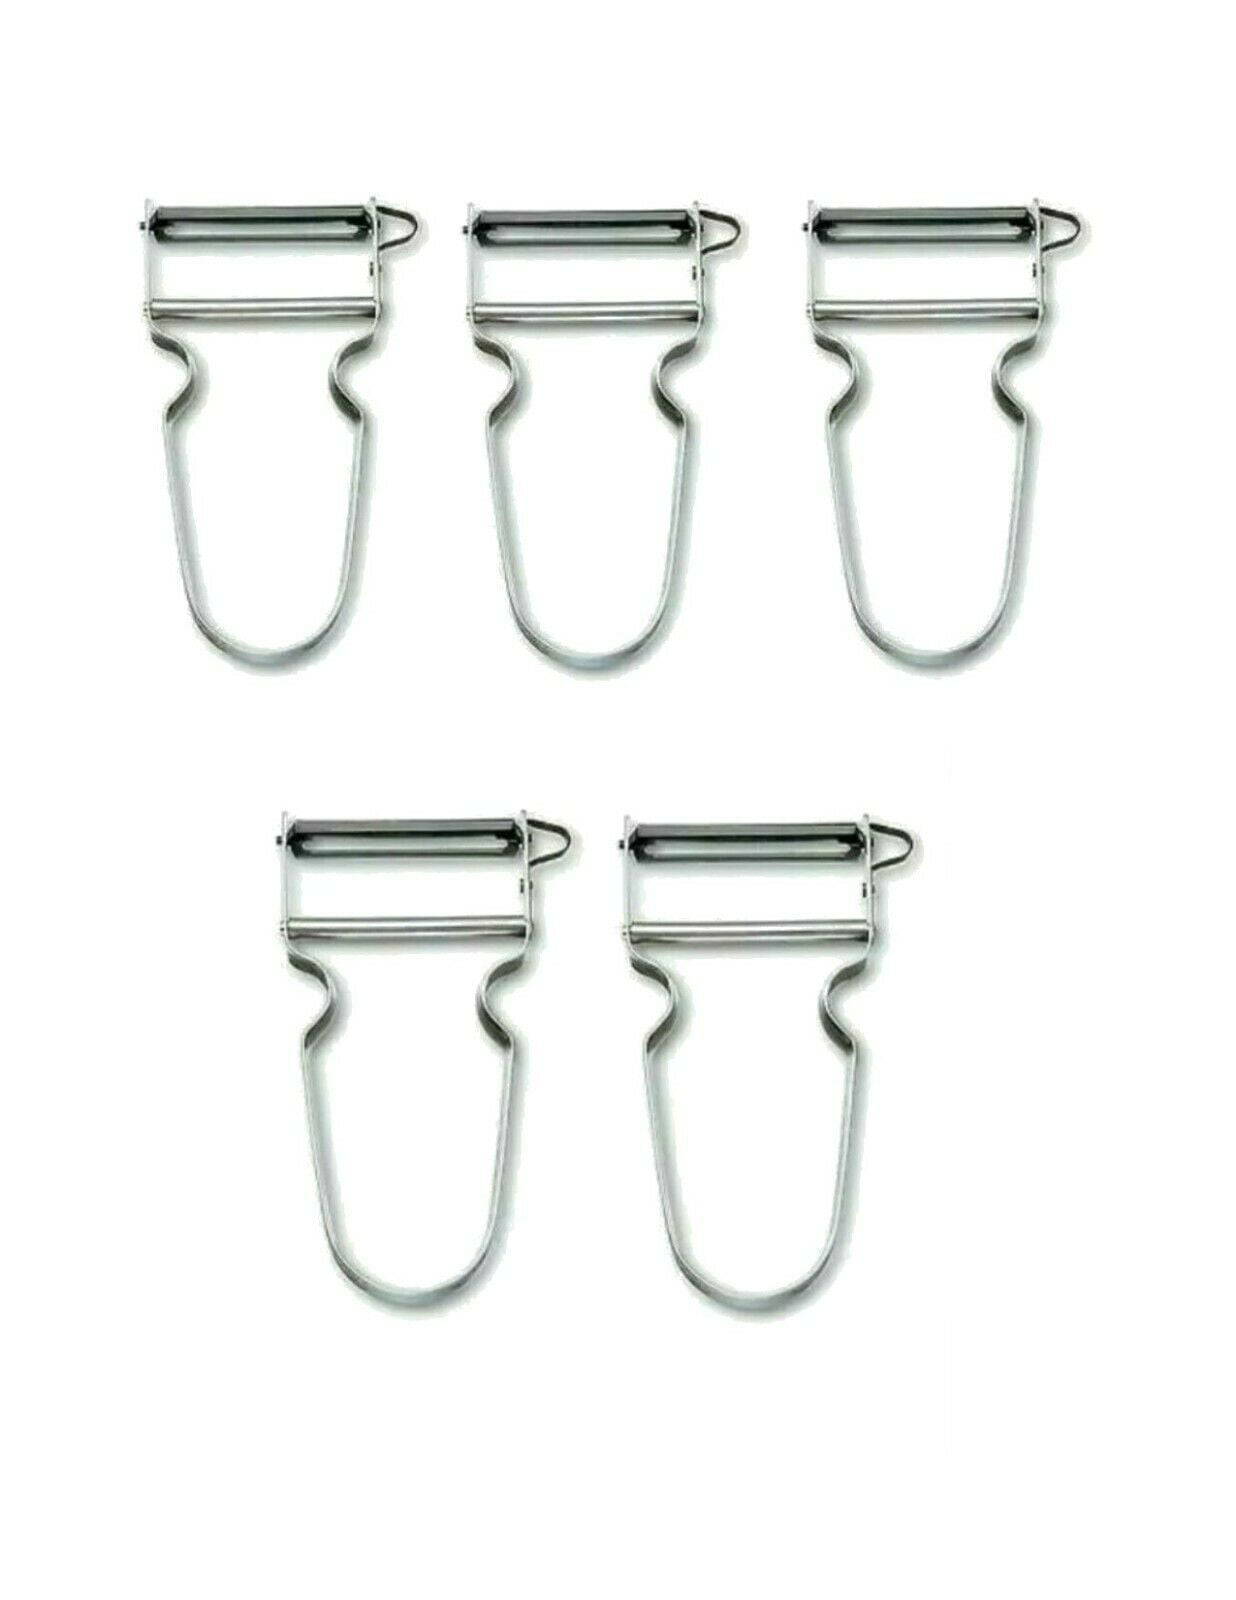 ZENA SWISS Star Stainless Steel Fruit And Vegetable Peeler Swiss Made-Pack Of 6 